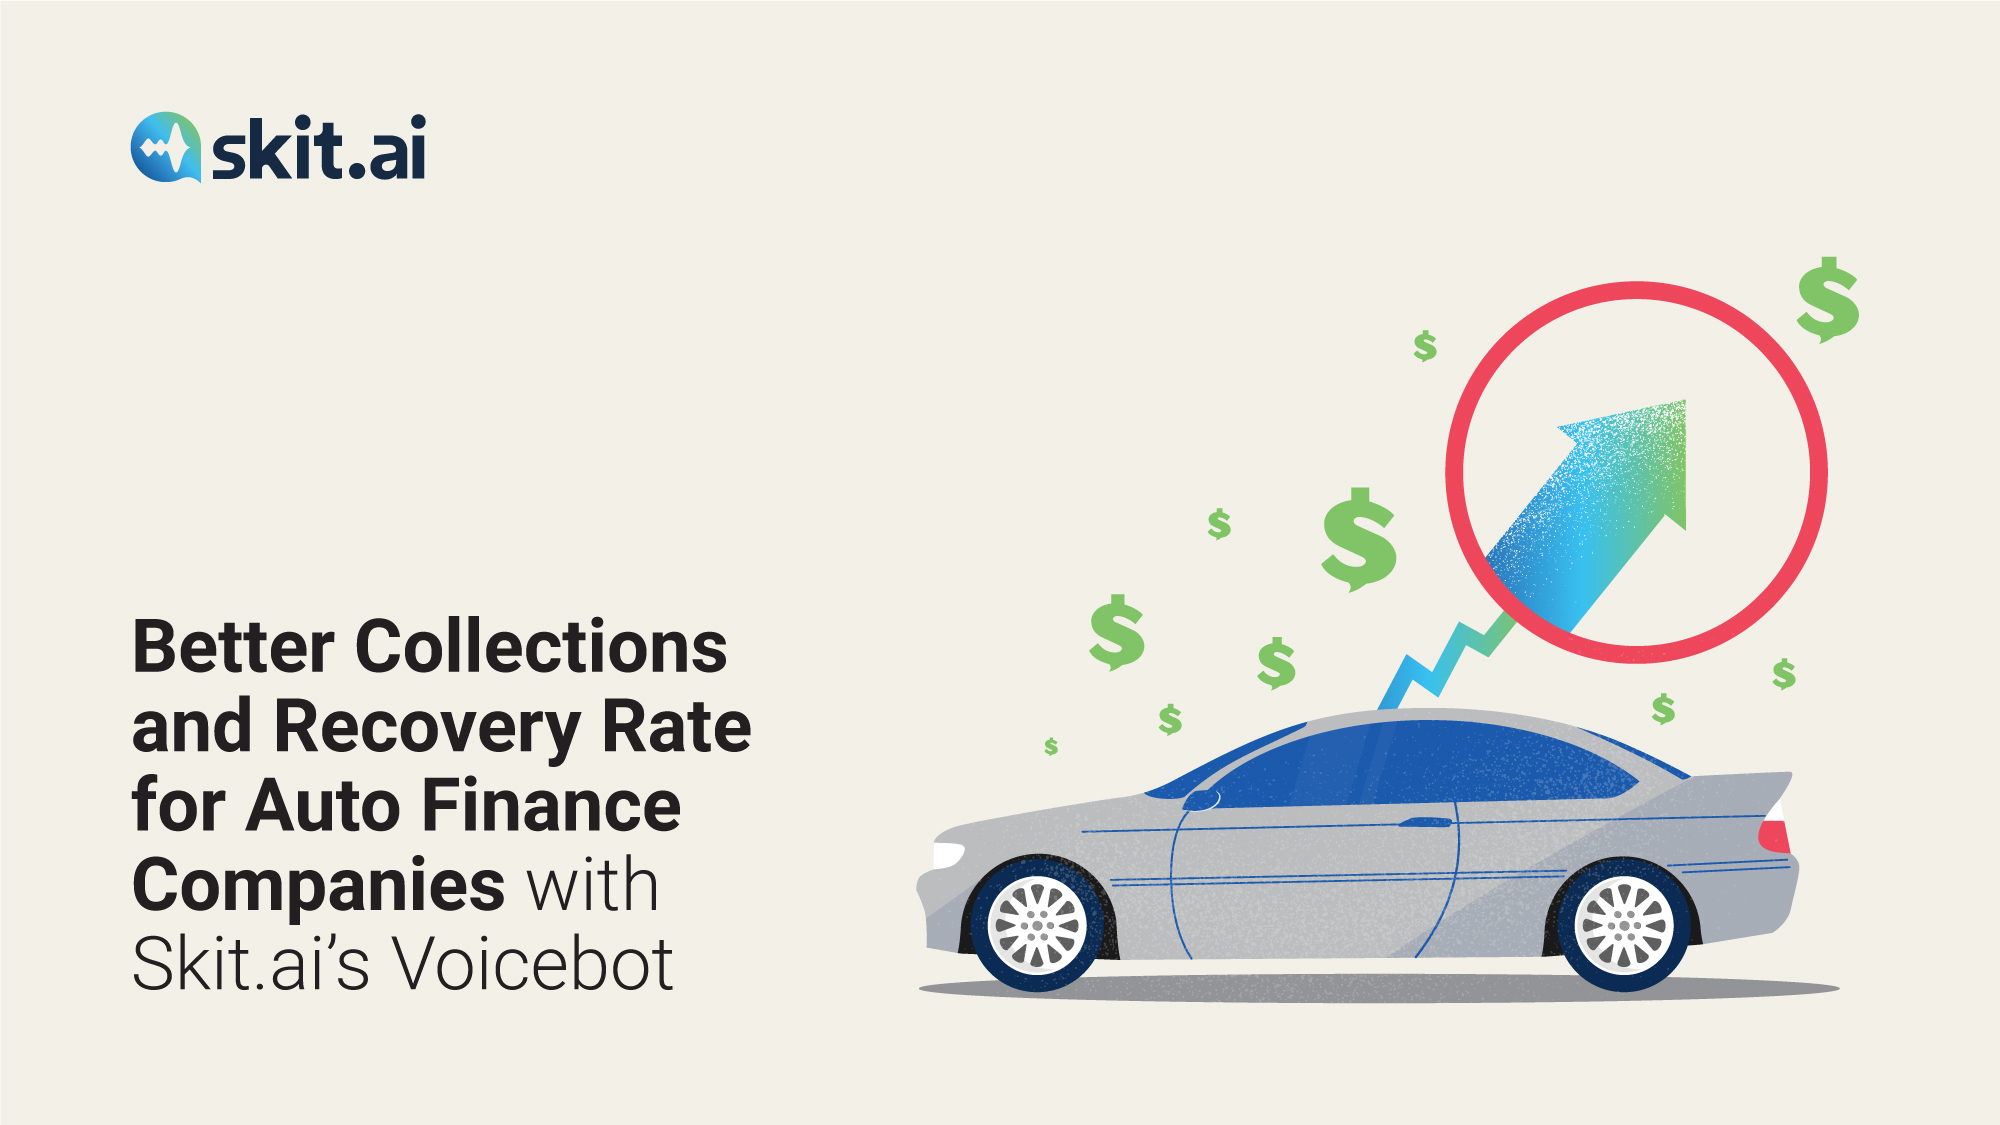 How Auto Finance Companies Can Improve Collections with Skit.ai’s Voicebot